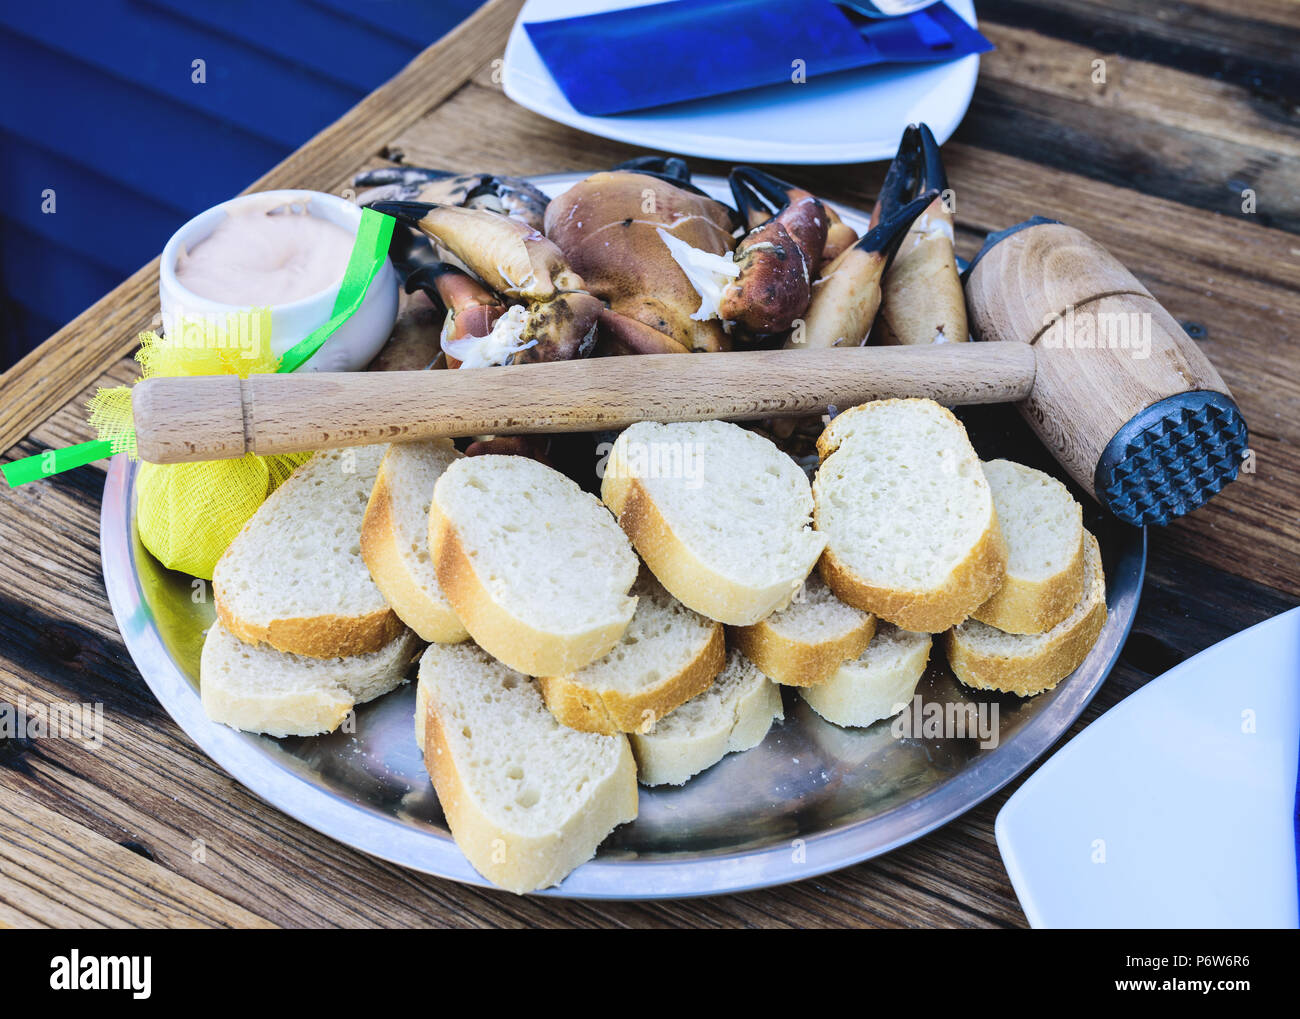 plate with boiled legs and claws of brown crab with bread and dip on wooden table Stock Photo